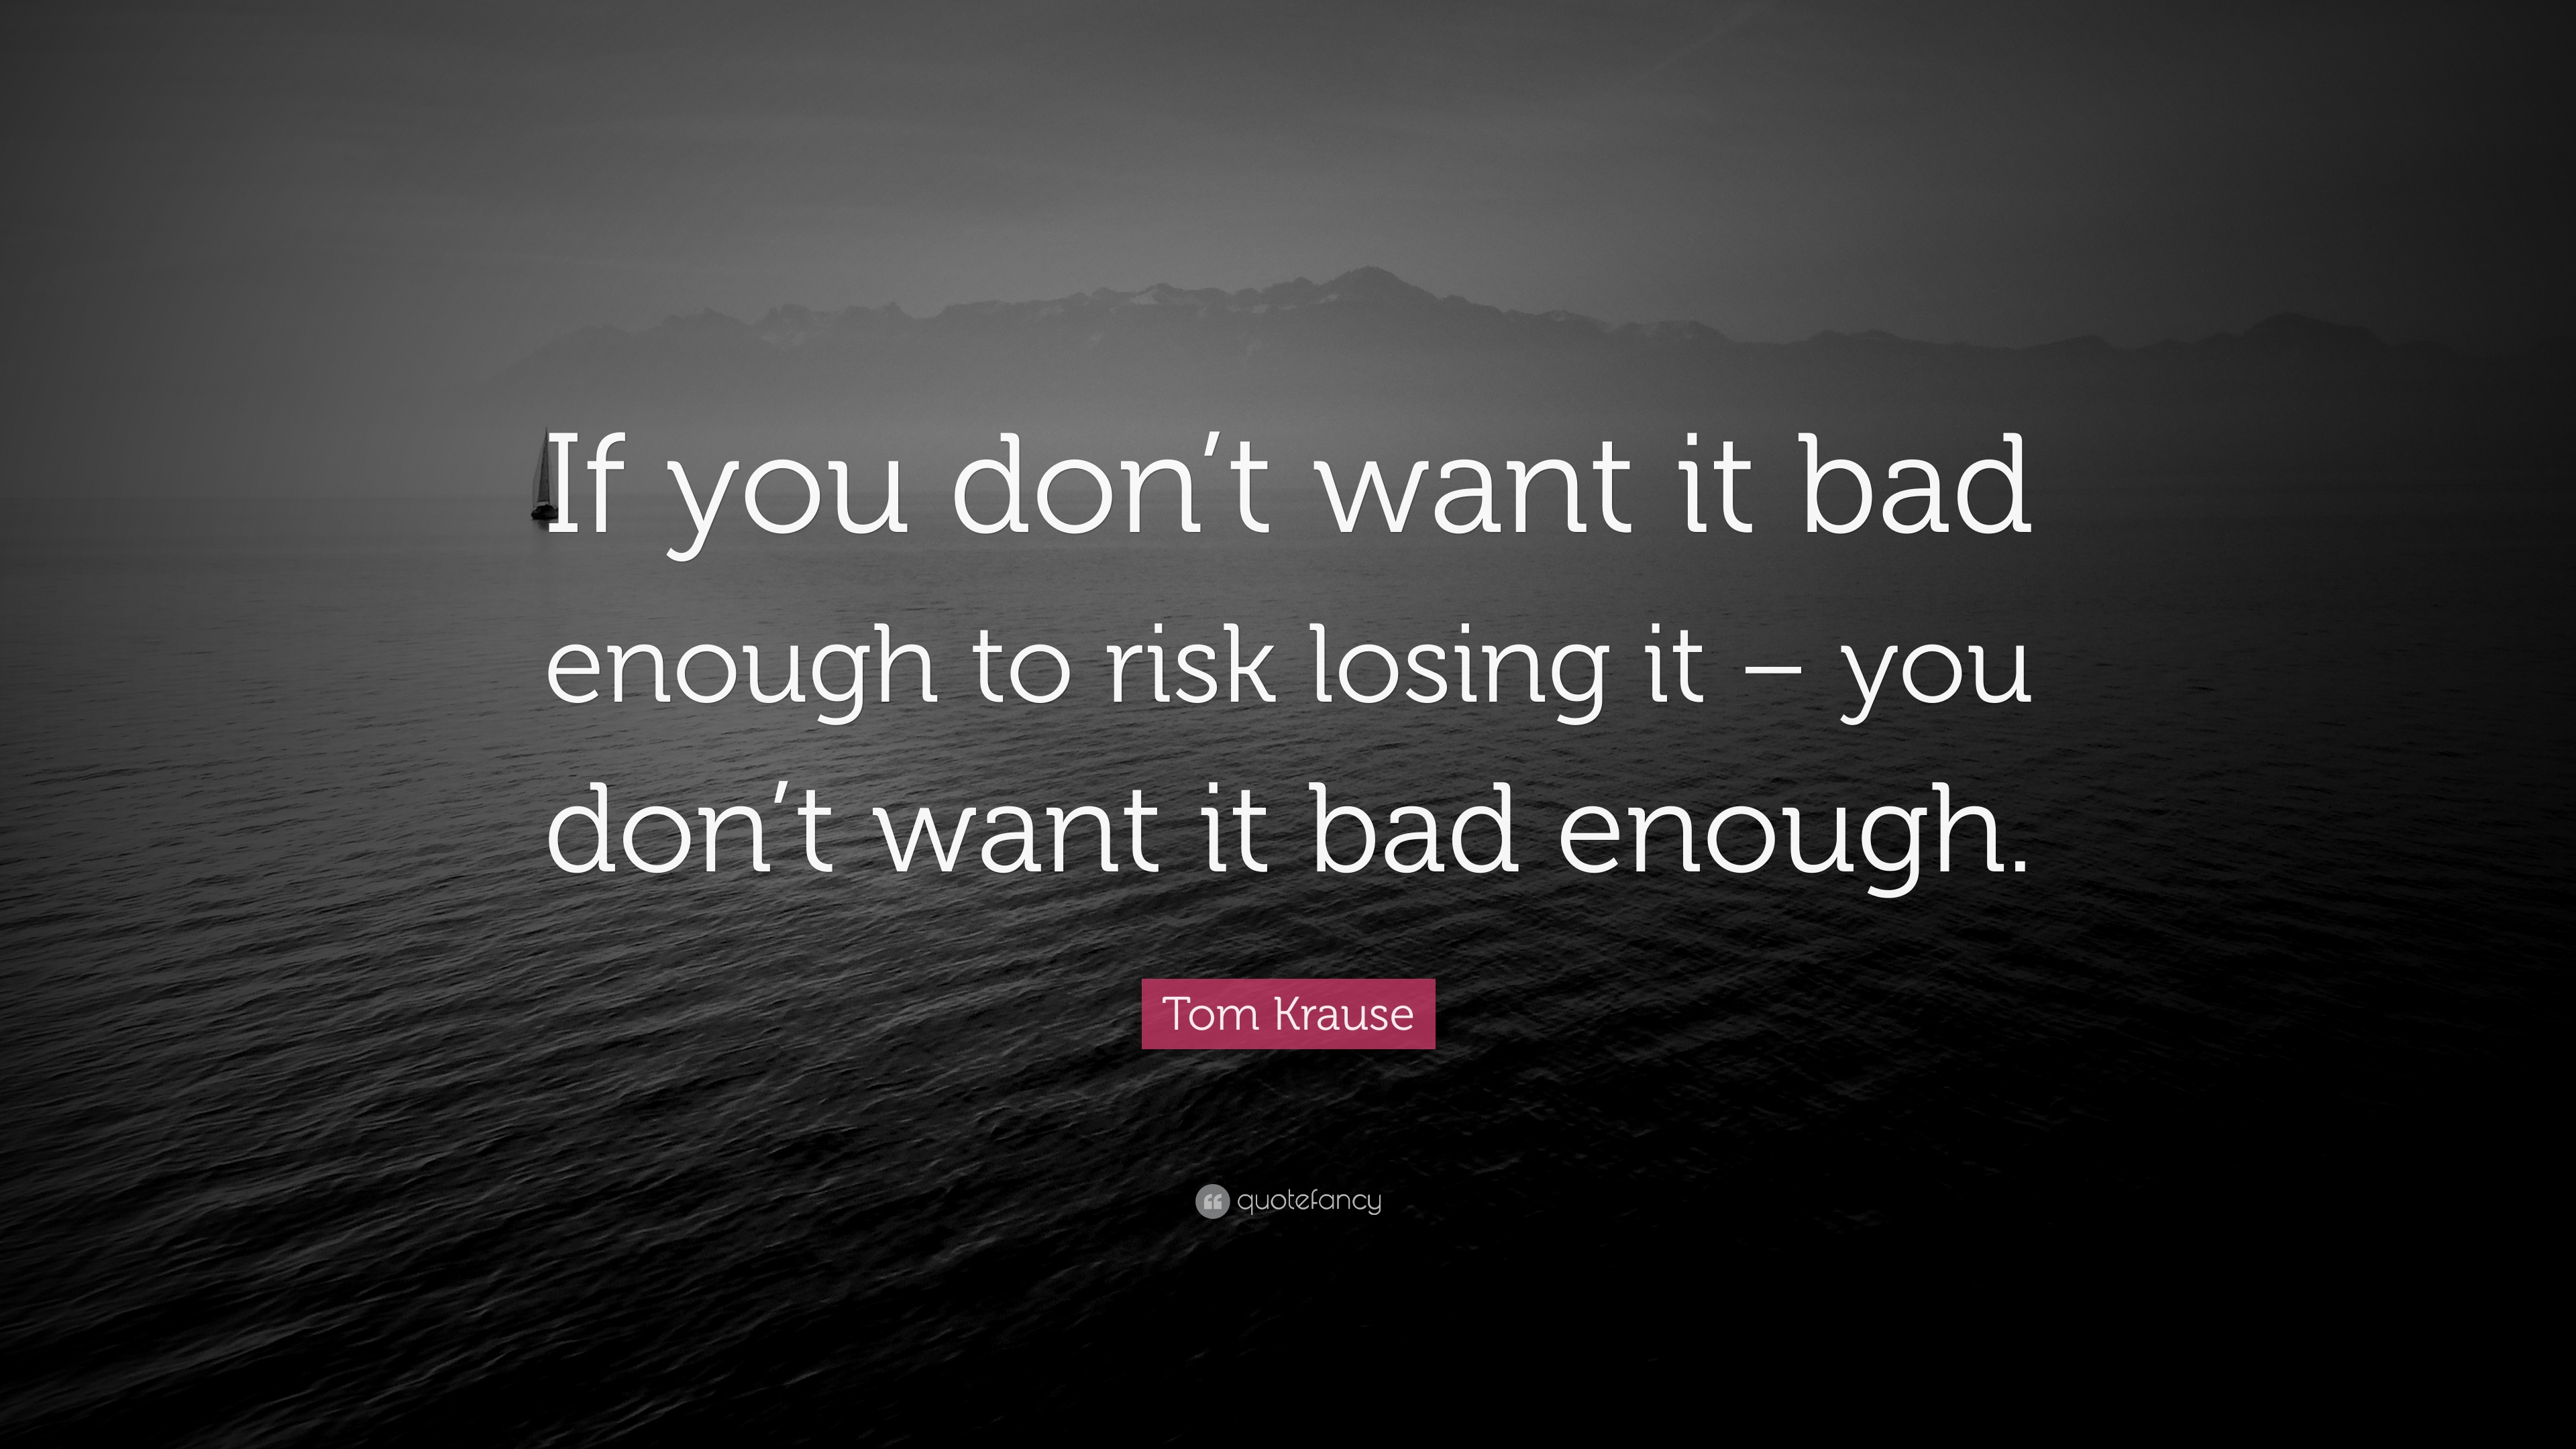 Tom Krause Quote: “If you don't want it bad enough to risk